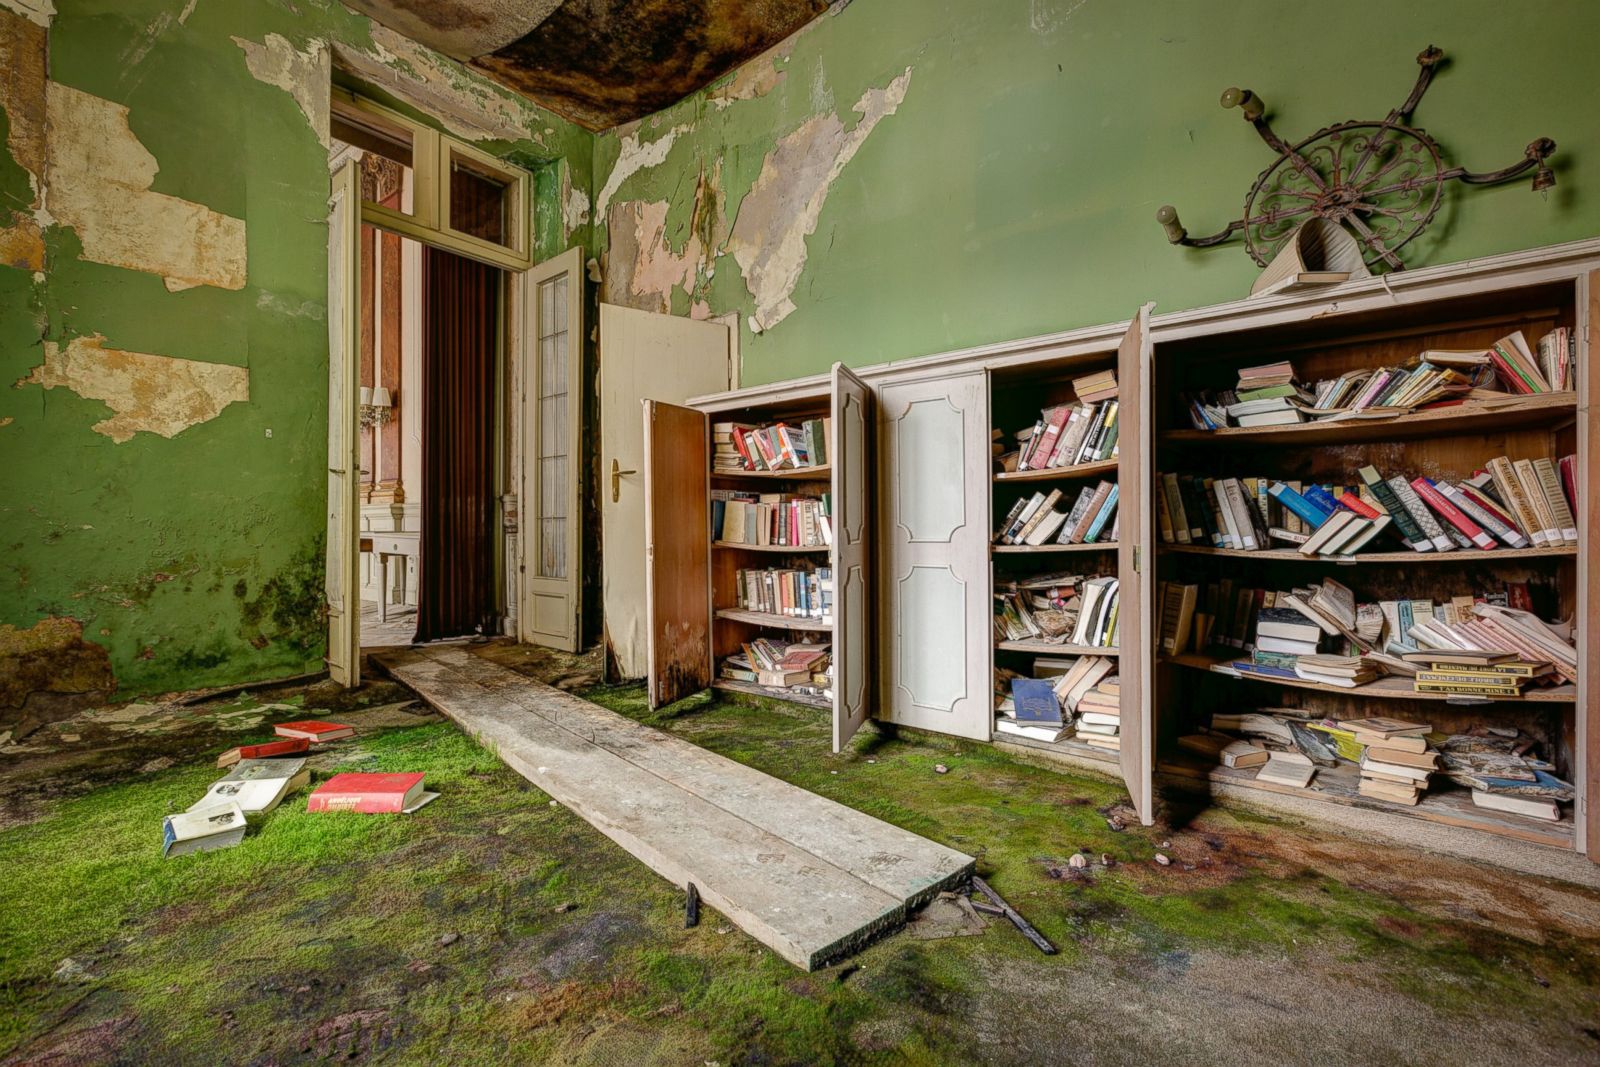 Eerie Photos of the World's Grandest Abandoned Hotels Photos | Image #2 - ABC News1600 x 1067